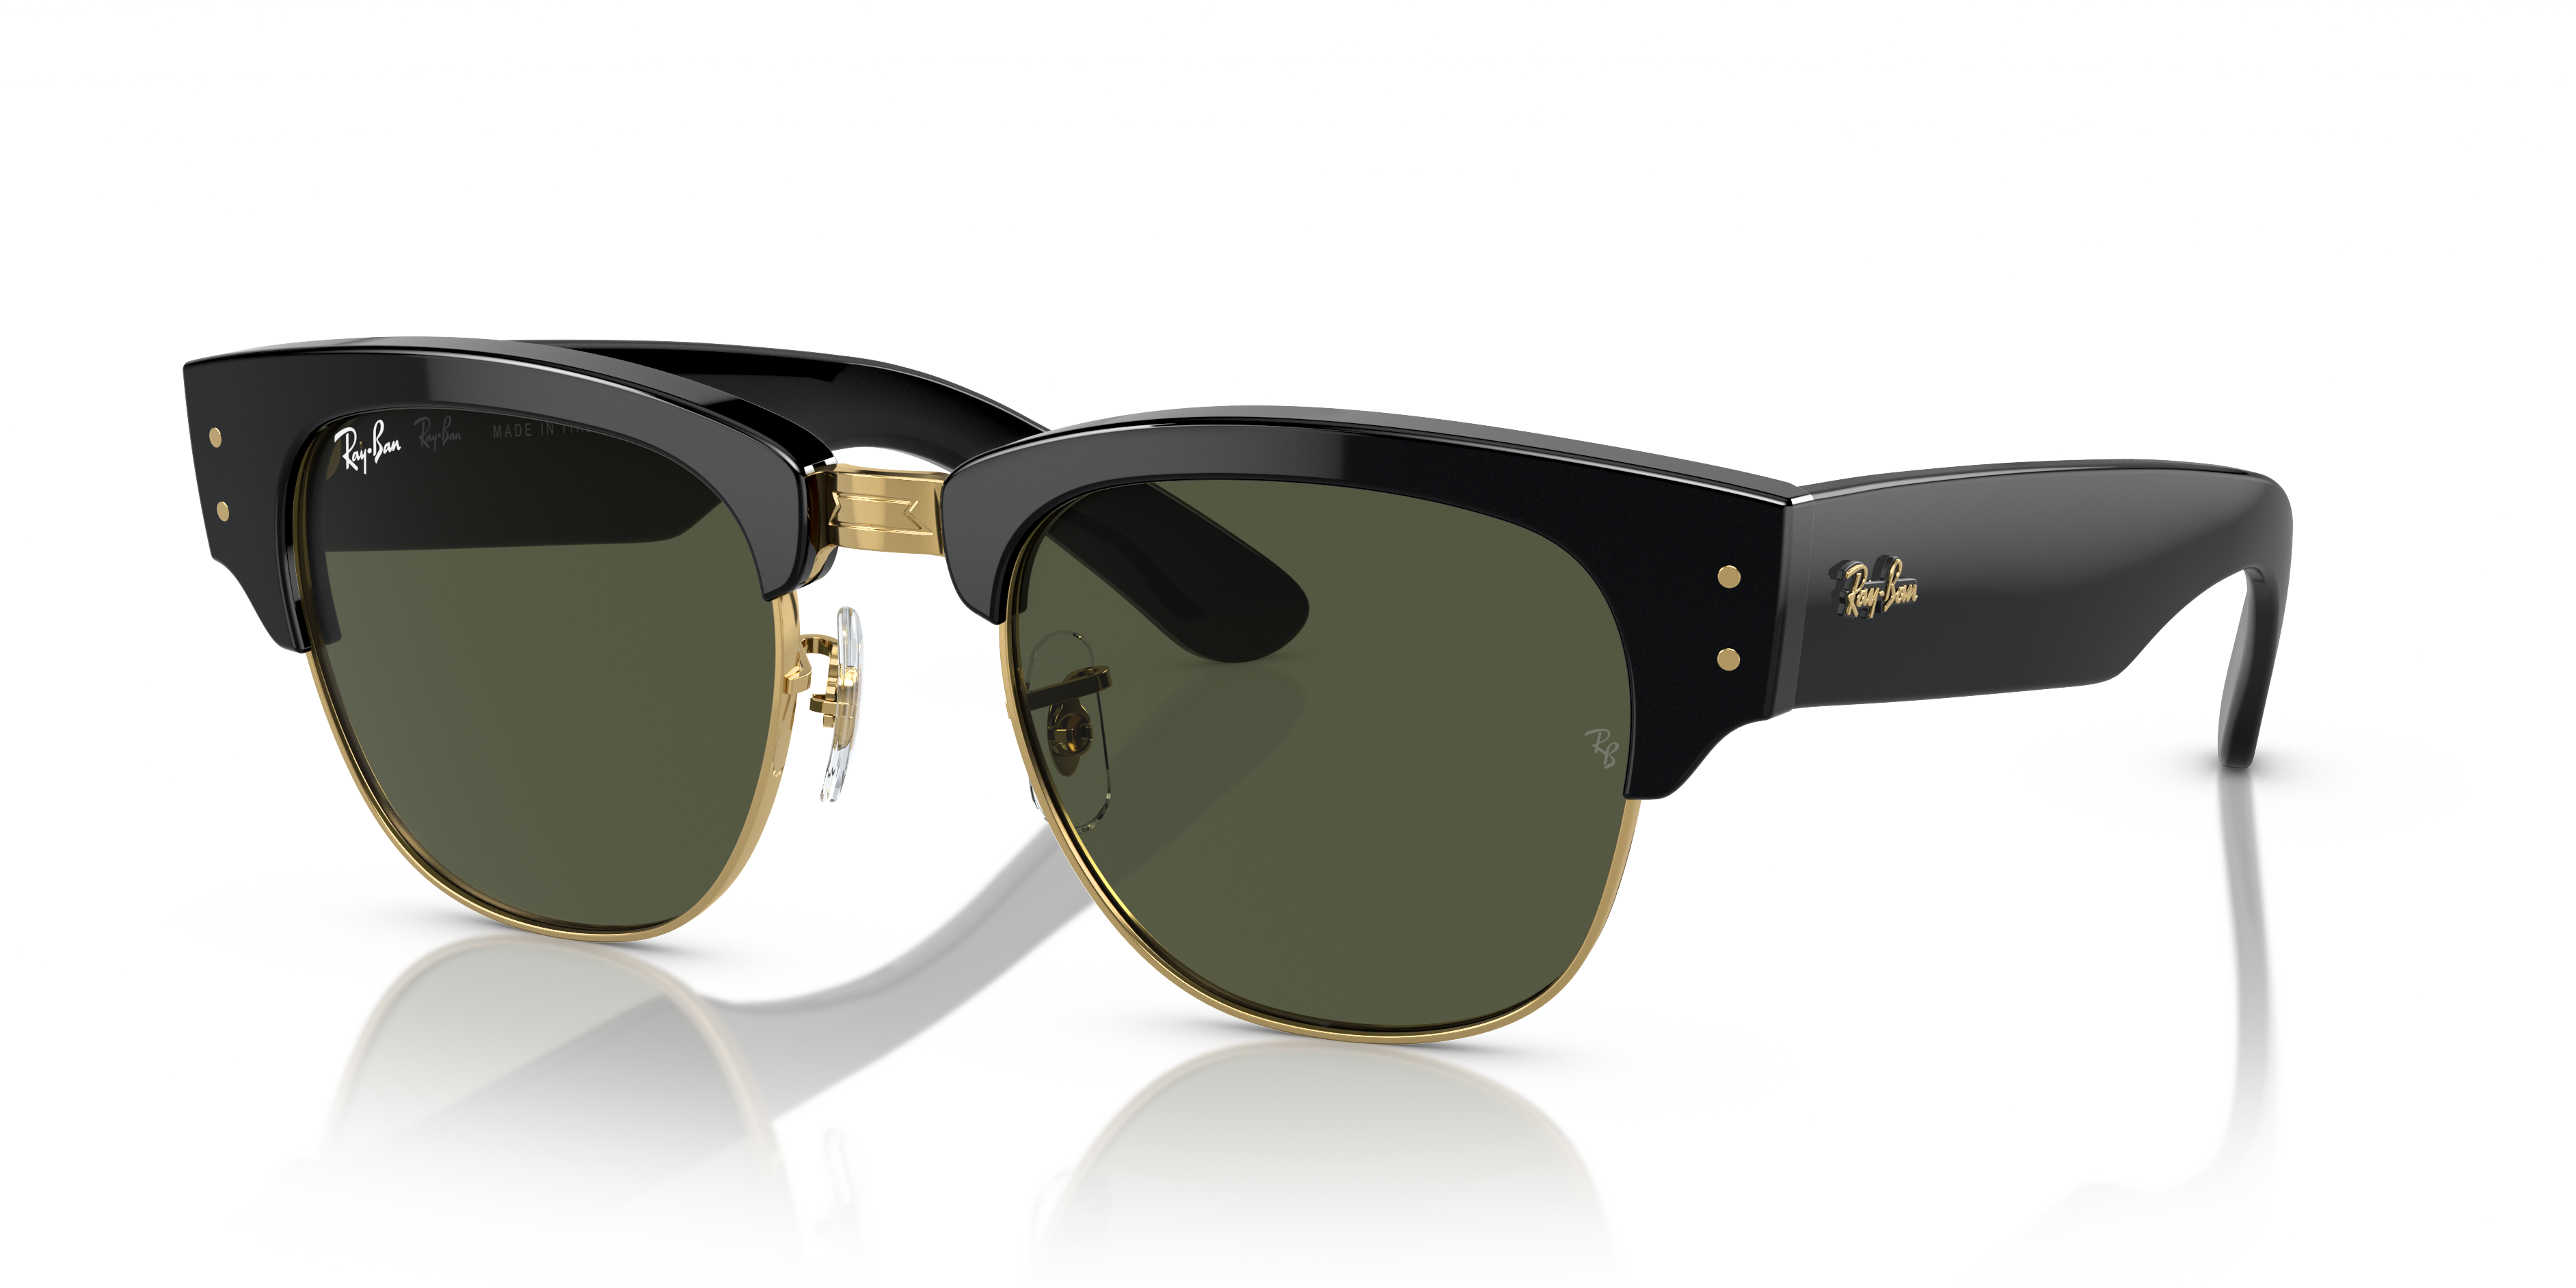 Ray-Ban Clubmaster Oversized RB4175 877 57 Sunglasses | Glasses Station